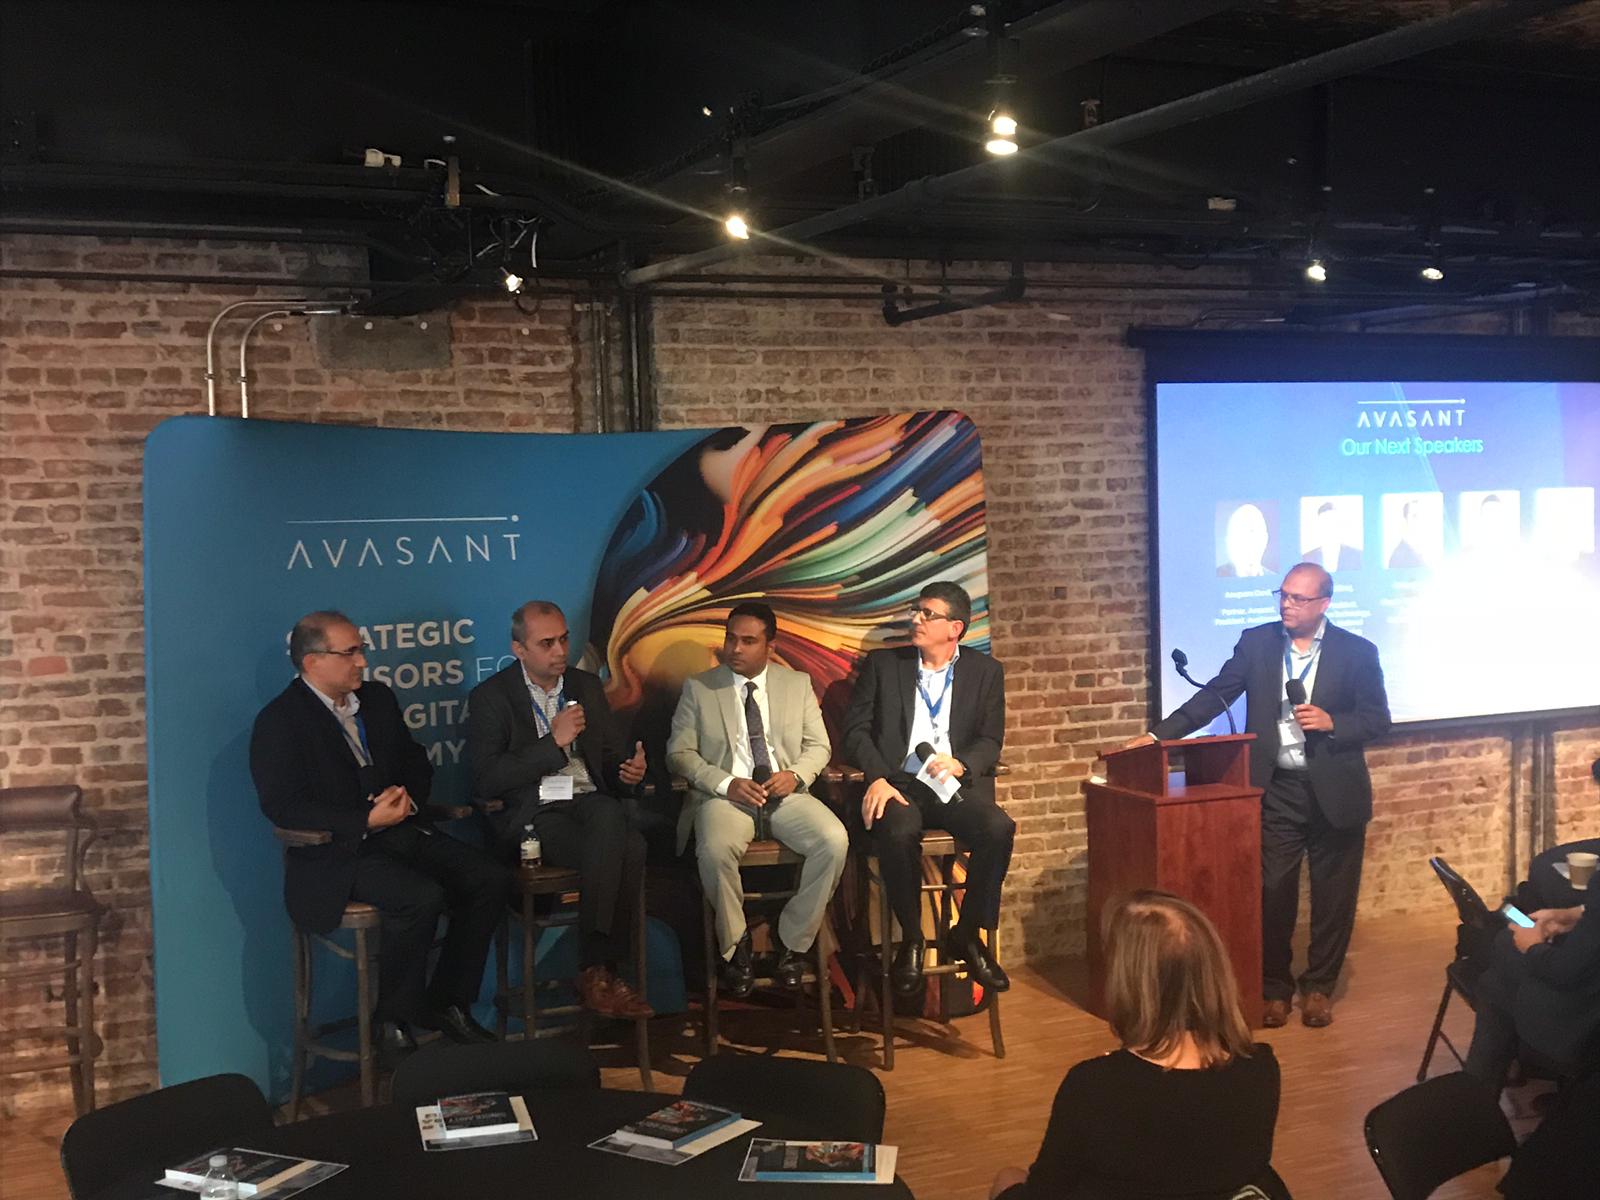 Panelists discuss, "Leveraging Automation, AI and Blockchain in the Transformation Journey"